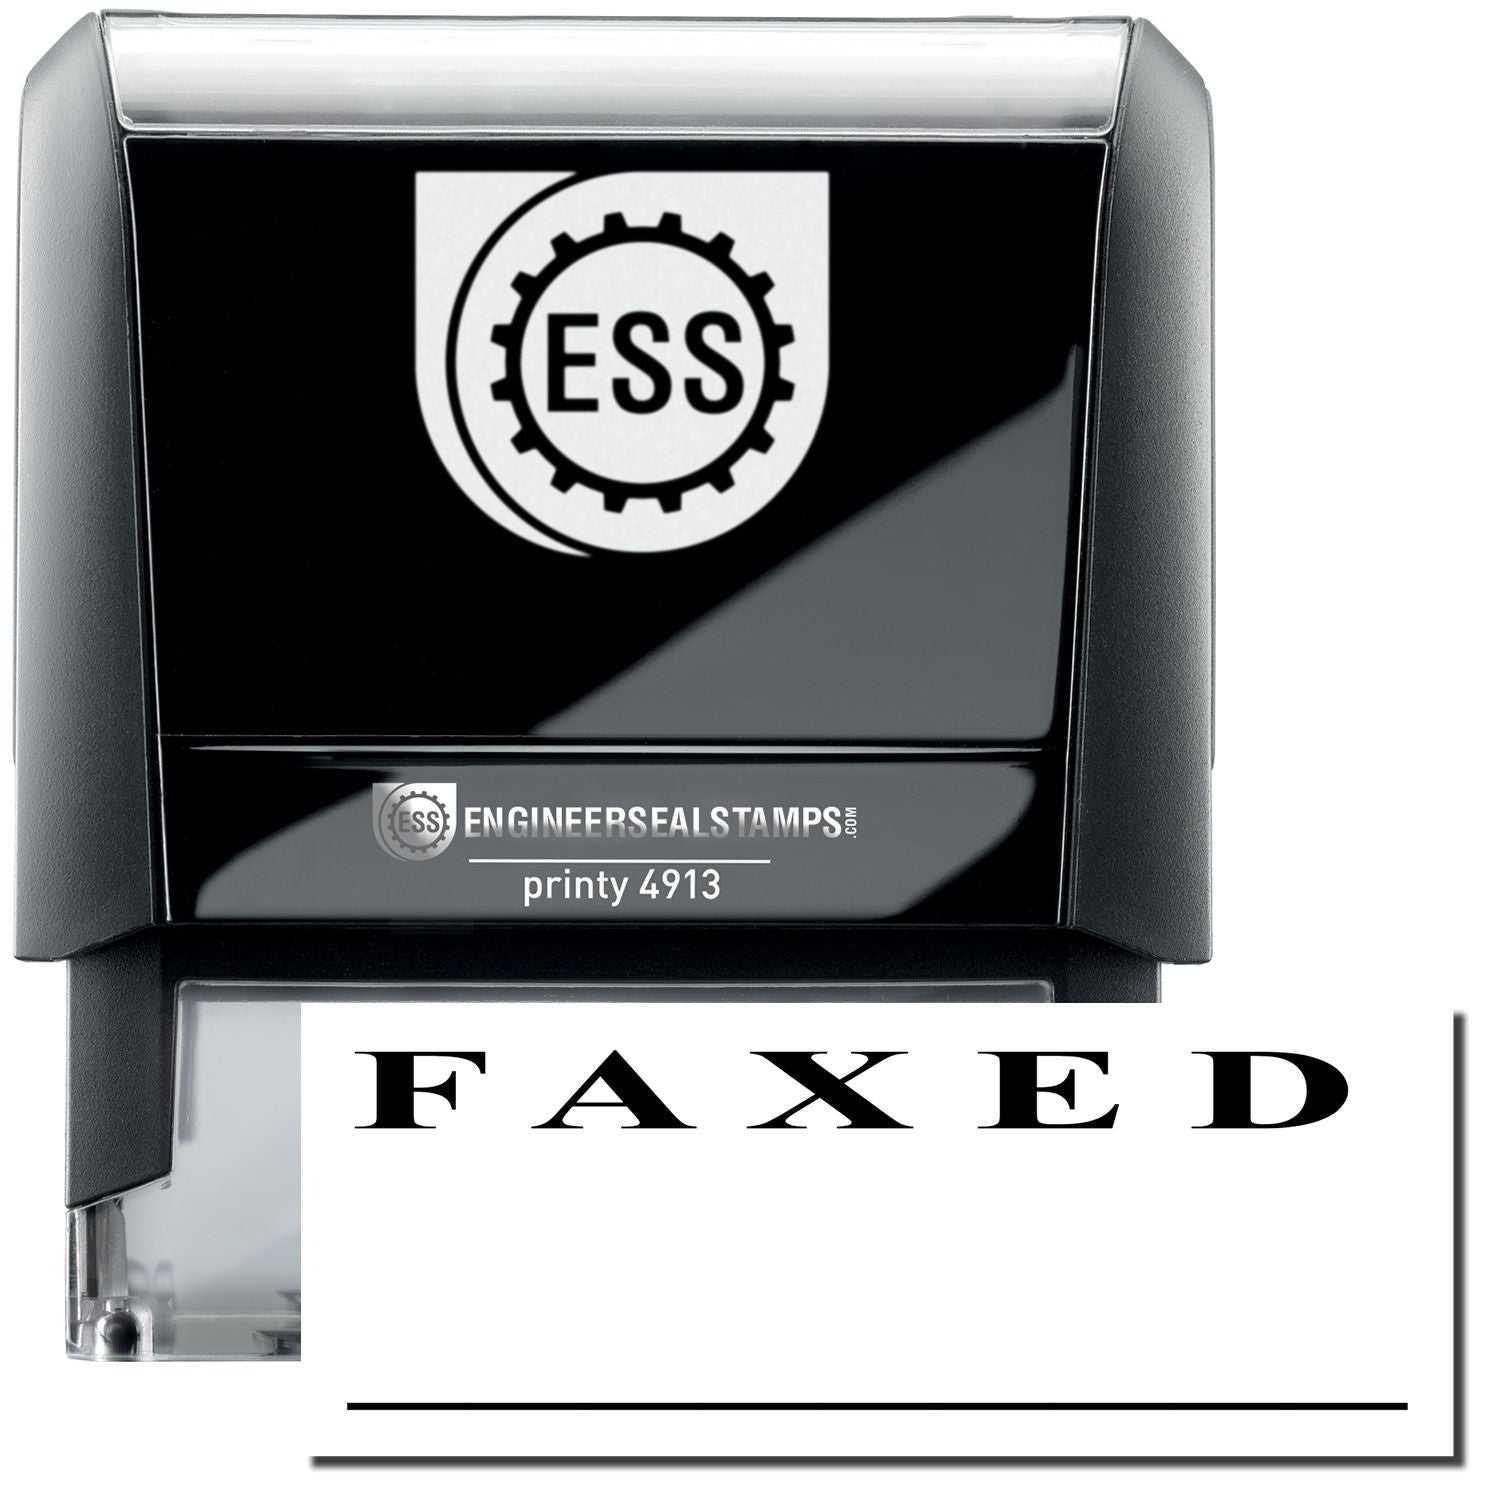 A self-inking stamp with a stamped image showing how the text "FAXED" in a large bold font with a line is displayed by it.